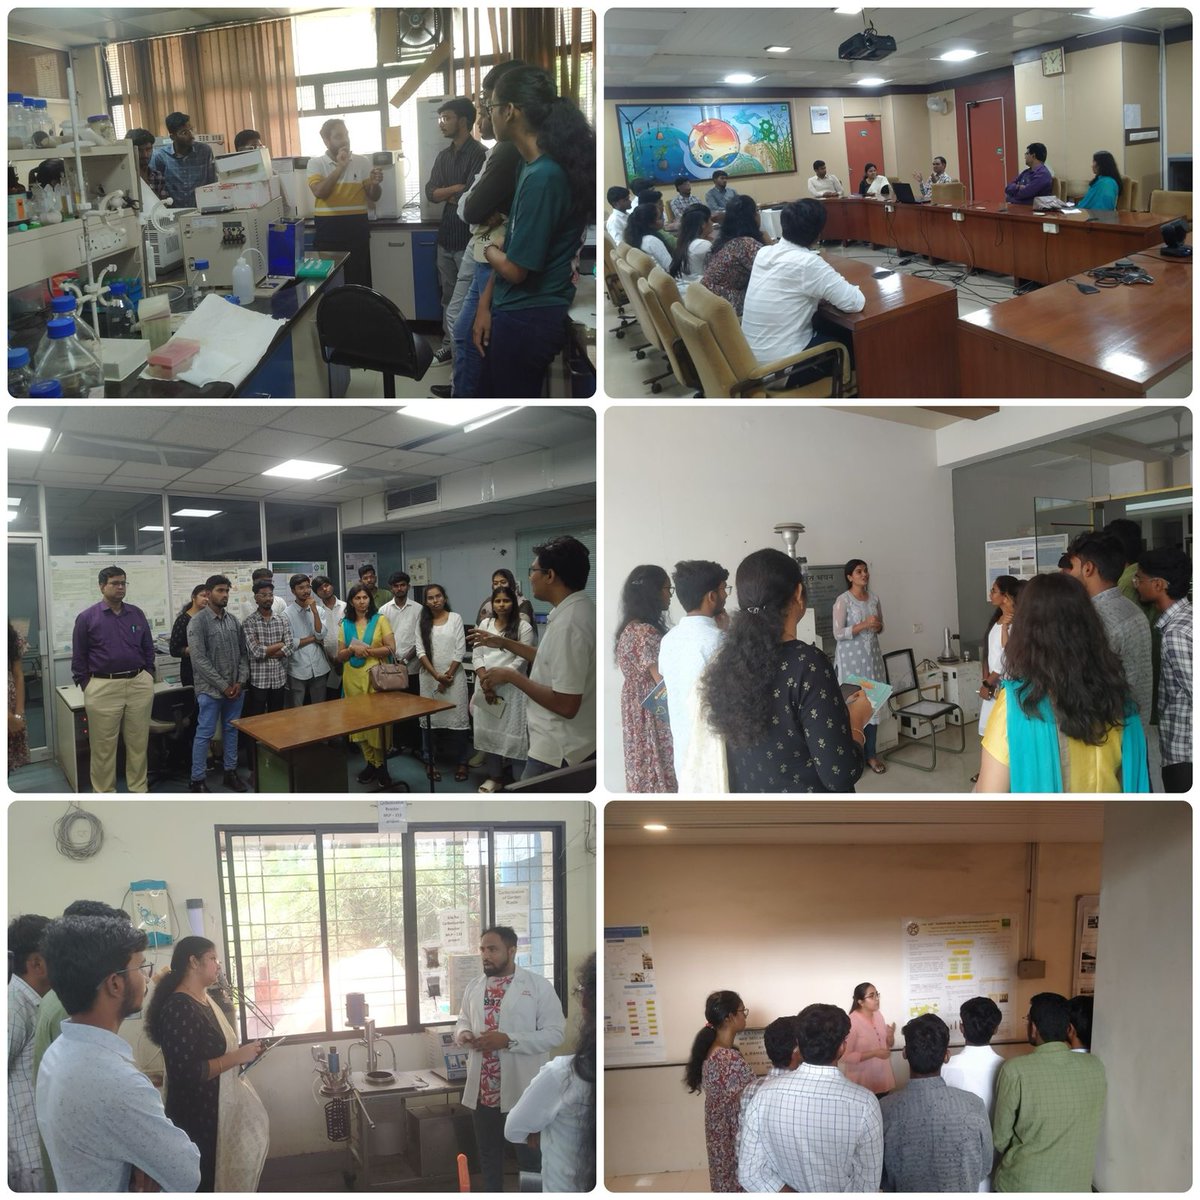 B.Tech. Civil Engineering students from SR University Warangal were exposed to ongoing research at the Institute during their two-day educational visit. The students were inspired to pursue research projects that advance knowledge in environmental engineering